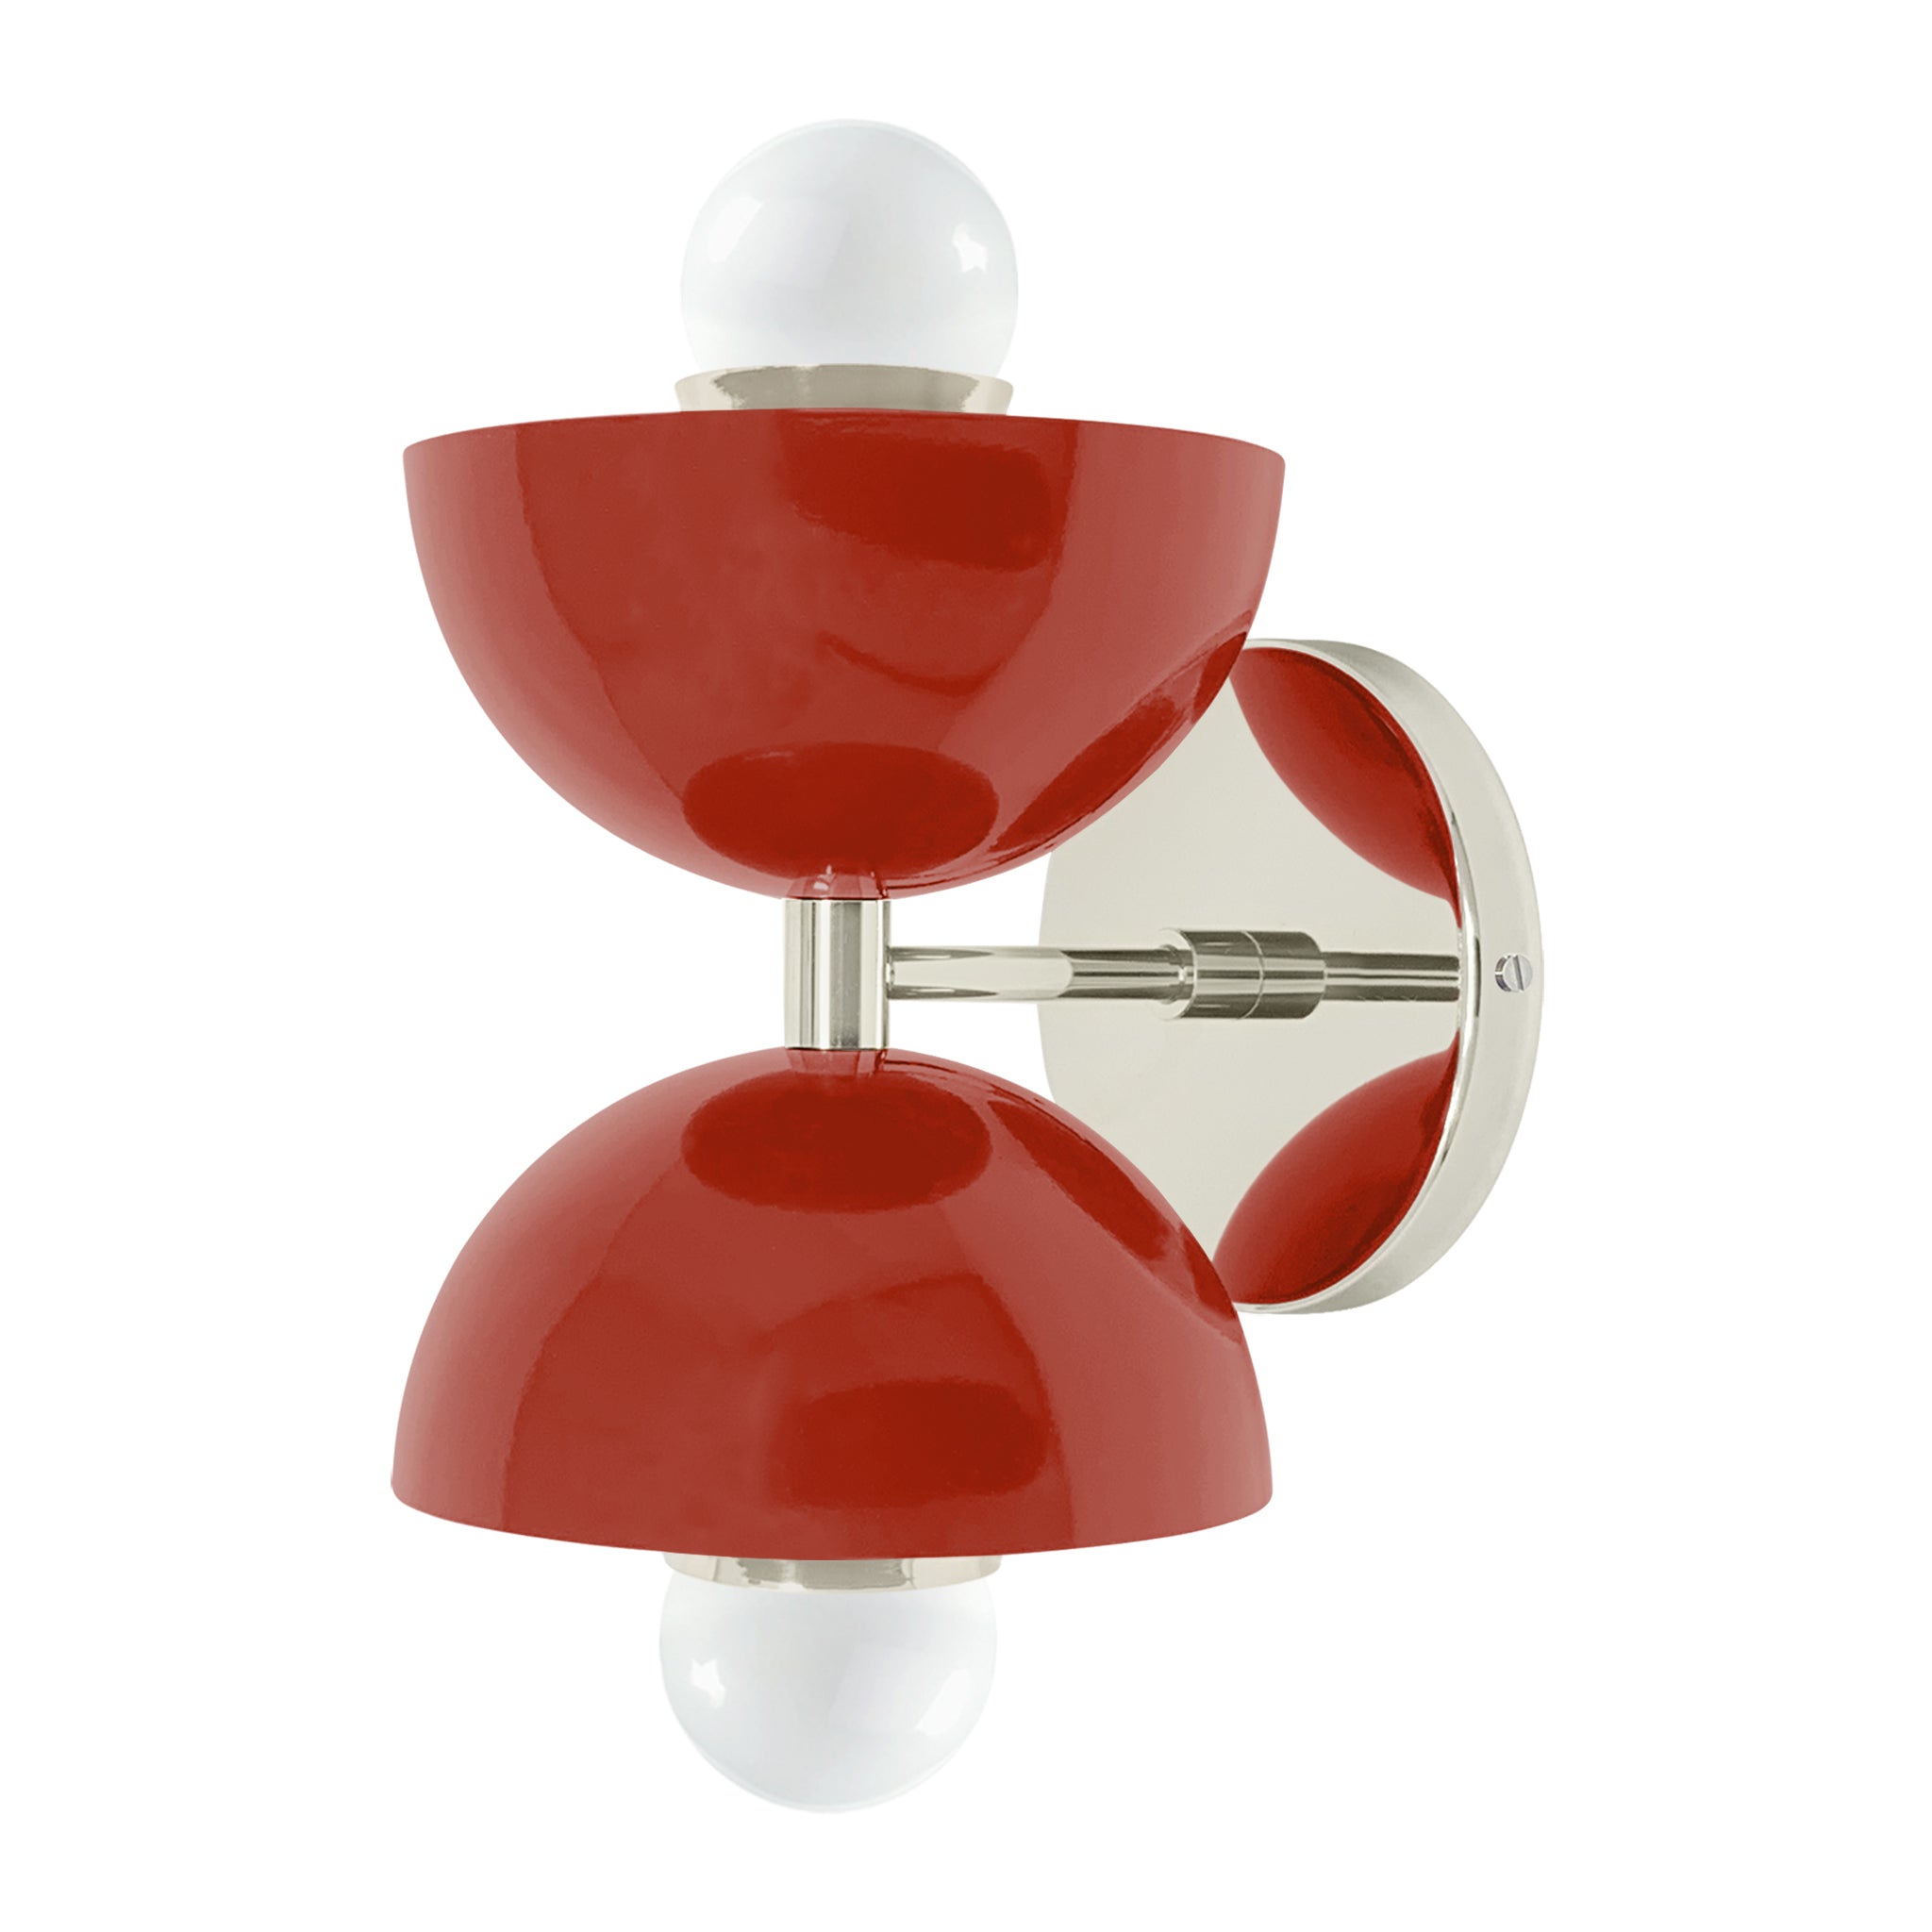 Nickel and riding hood red color Amigo sconce Dutton Brown lighting